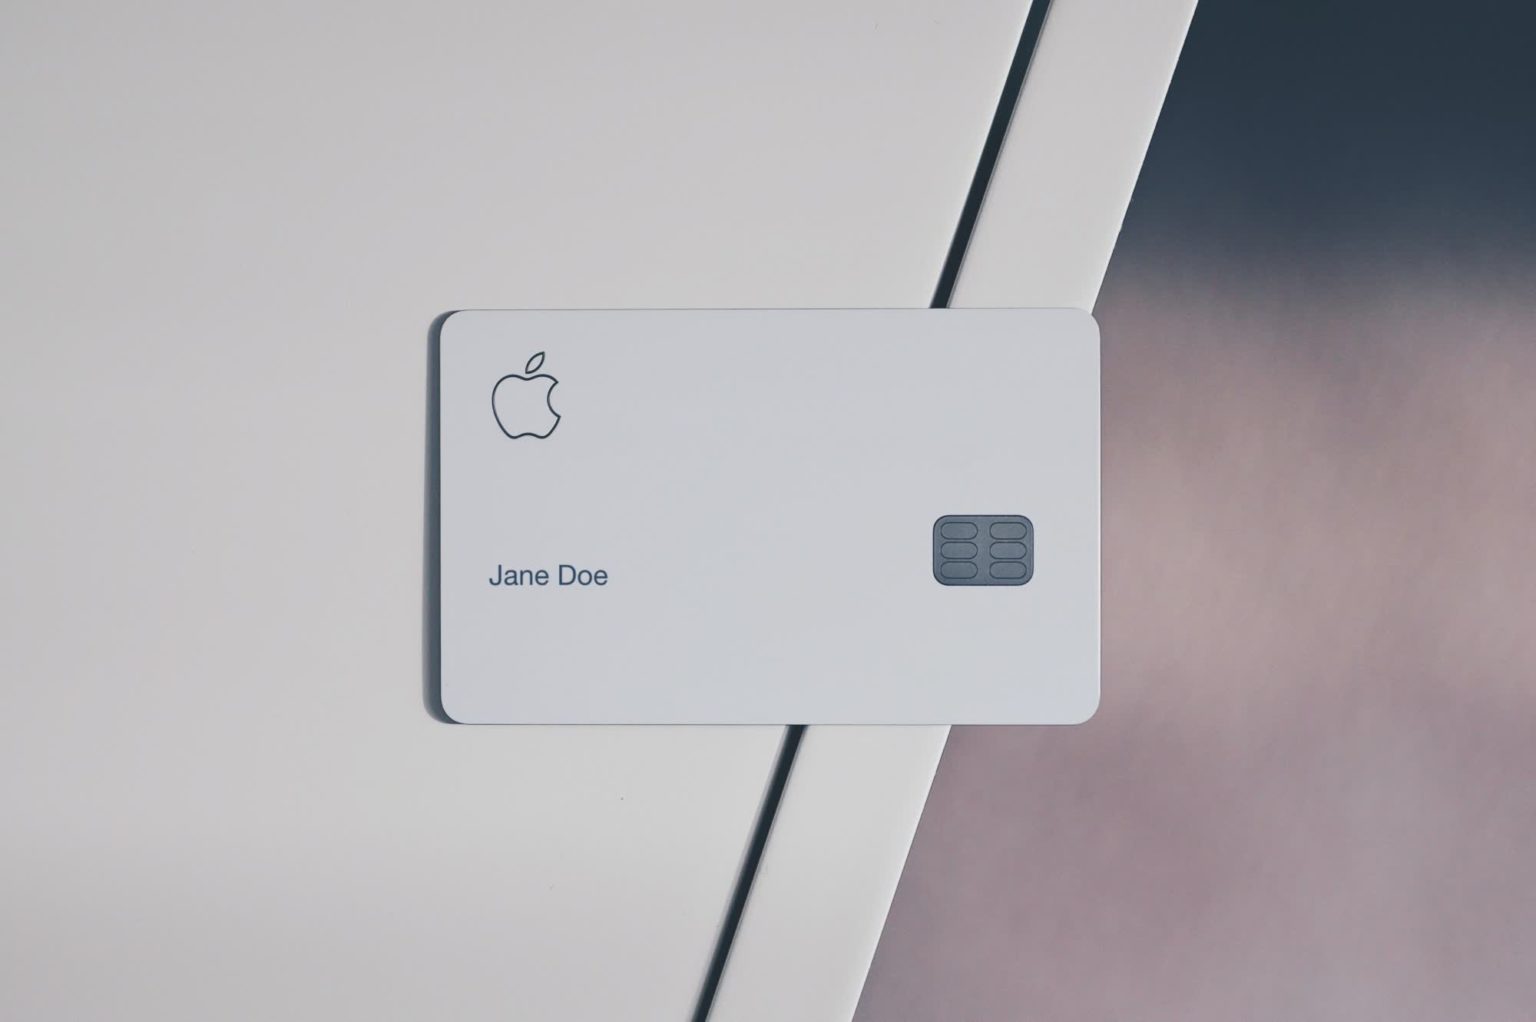 Apple wants to end partnership with Goldman Sachs on Apple credit card